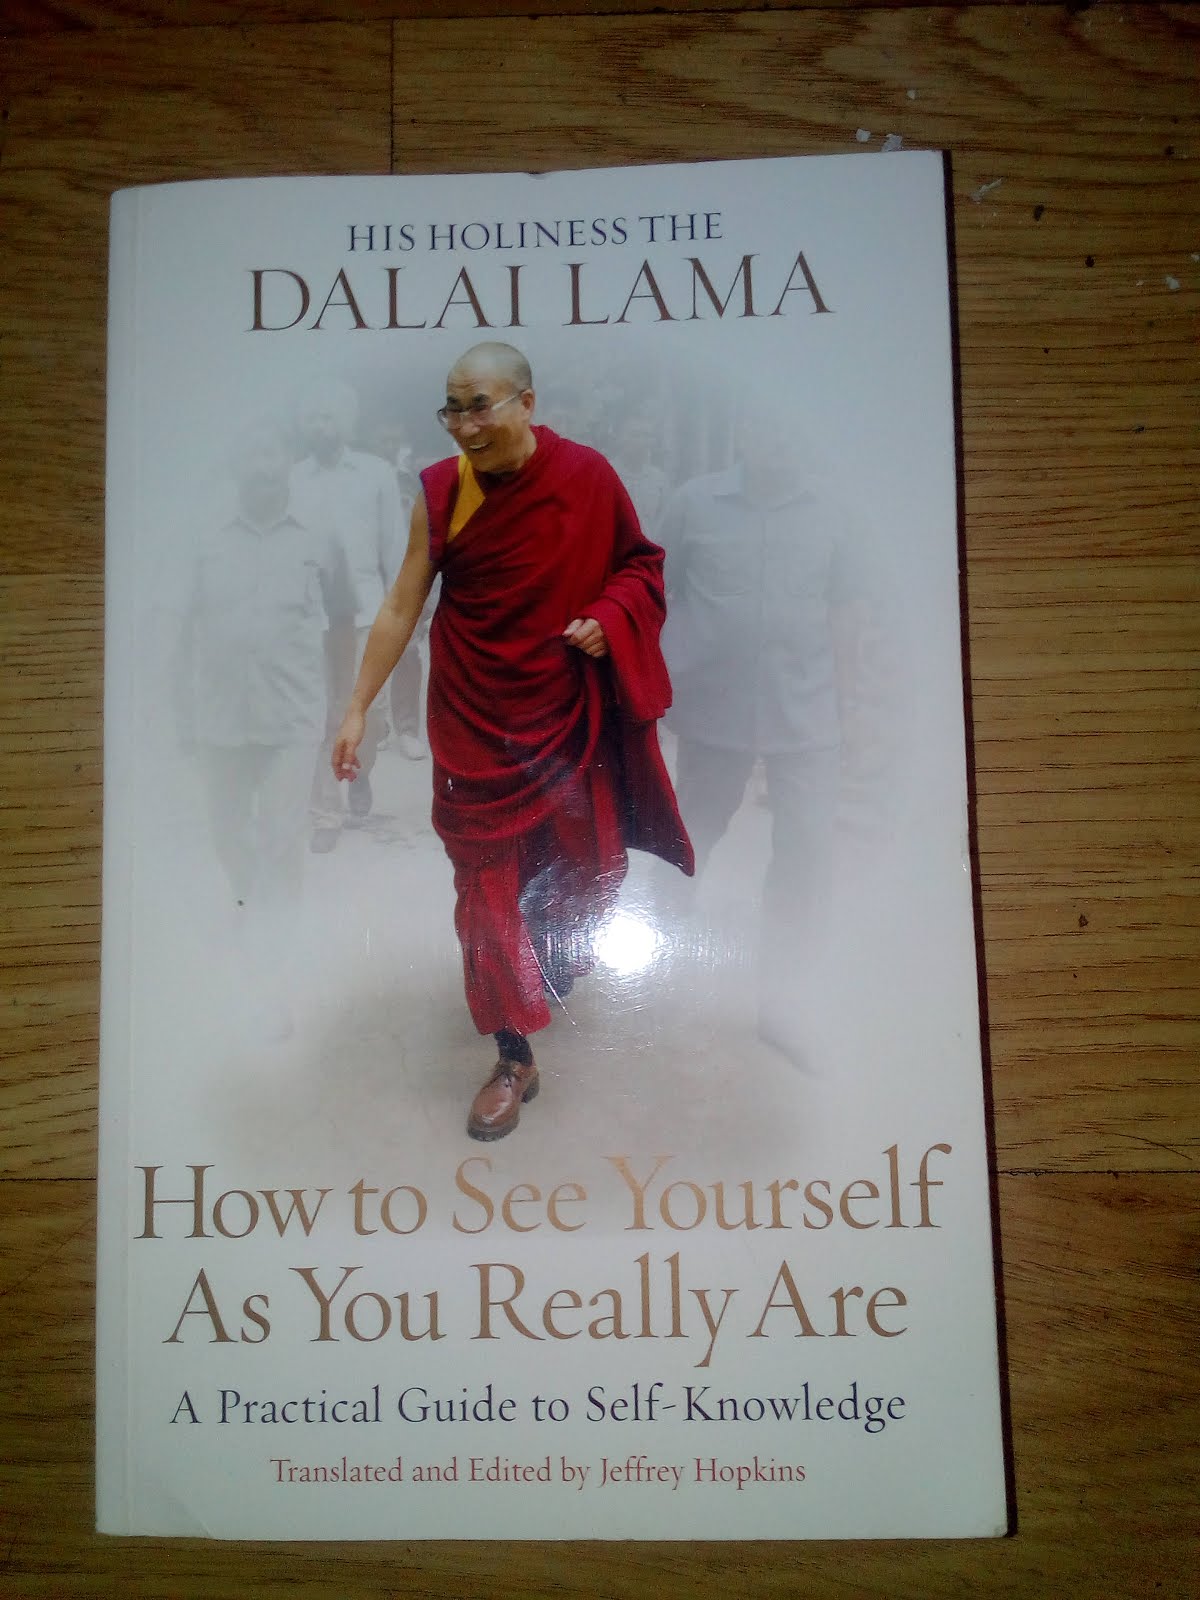 'How to See Yurself As You Really Are' by<br>His Holiness the Dalai Lama.